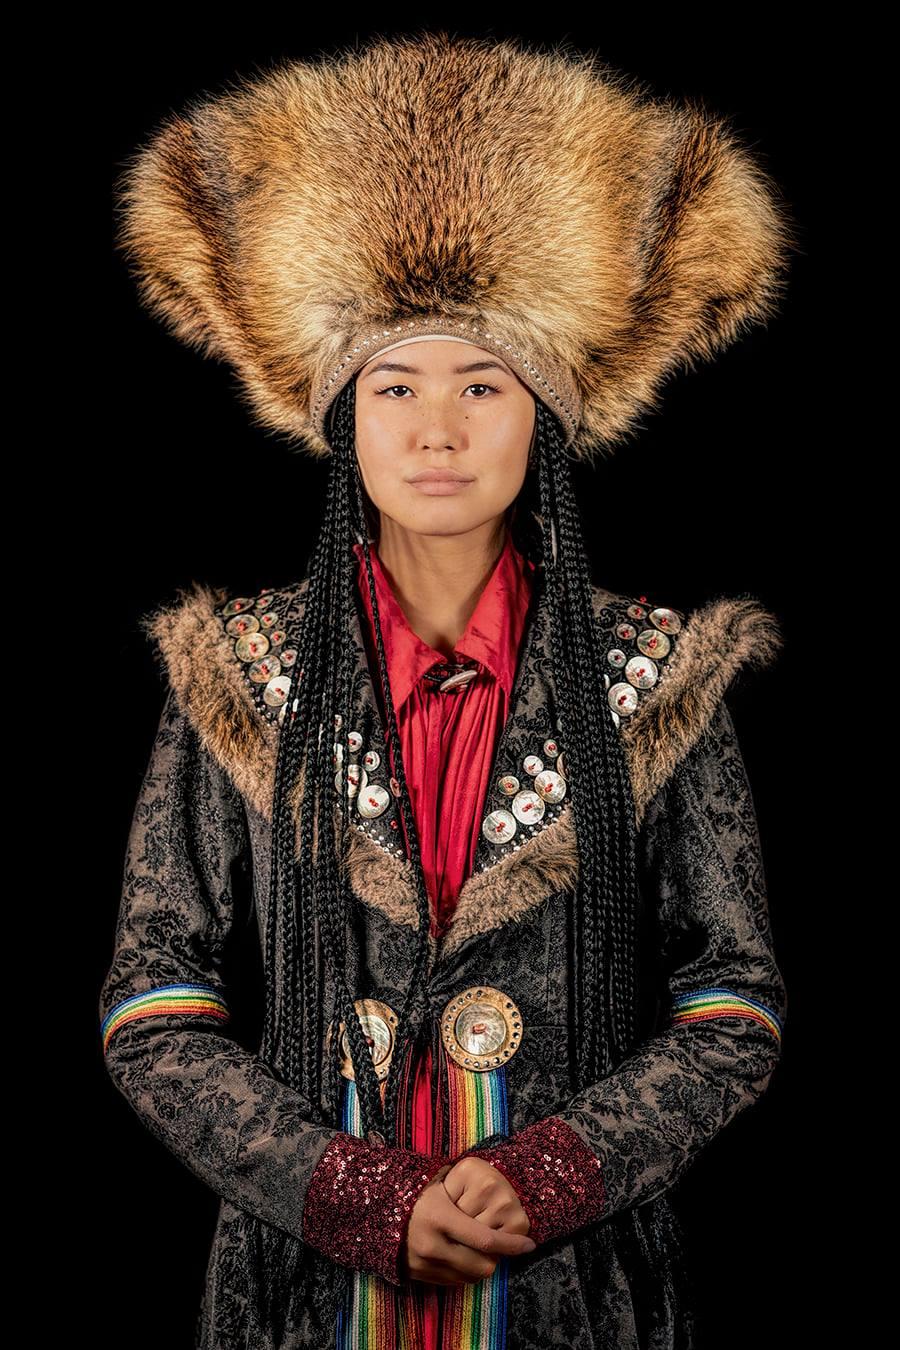 A portrait of a young indigenous Khakas woman from the Republic of Khakassia in Southern Siberia (© <a href="https://www.facebook.com/xperimenter">Alexander Khimushin</a> / The World In Faces)